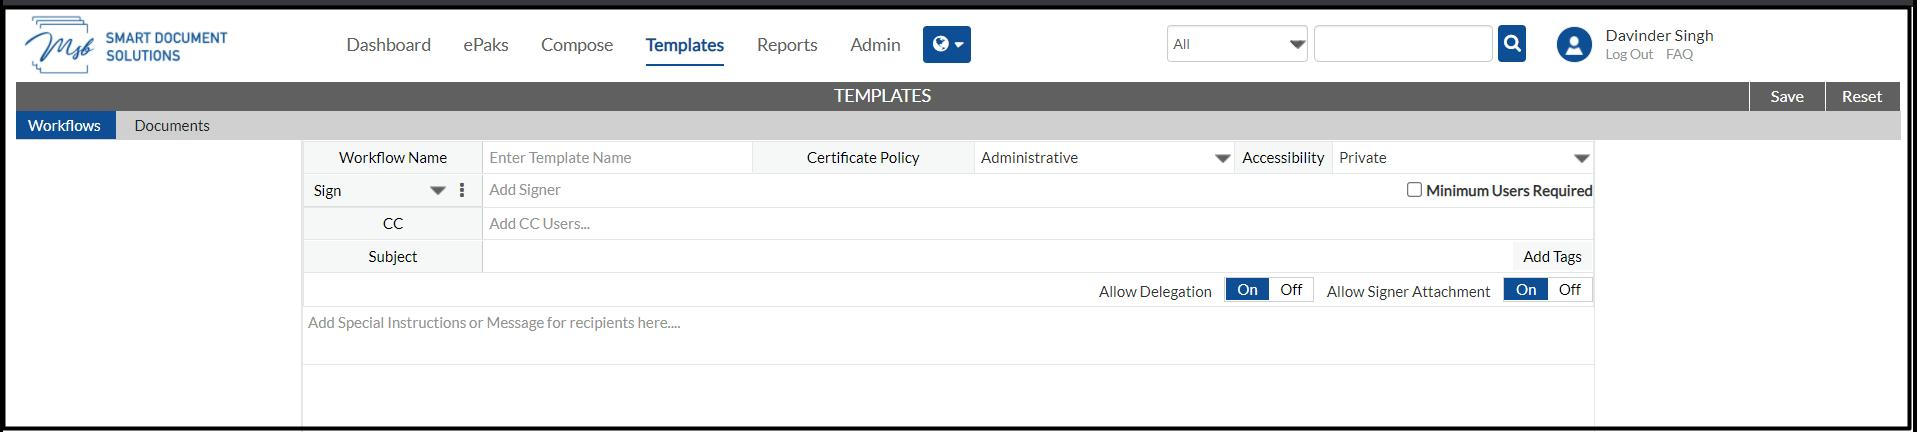 gning-certificate-policy-signature-tags-and-map-the-tags-to-signers